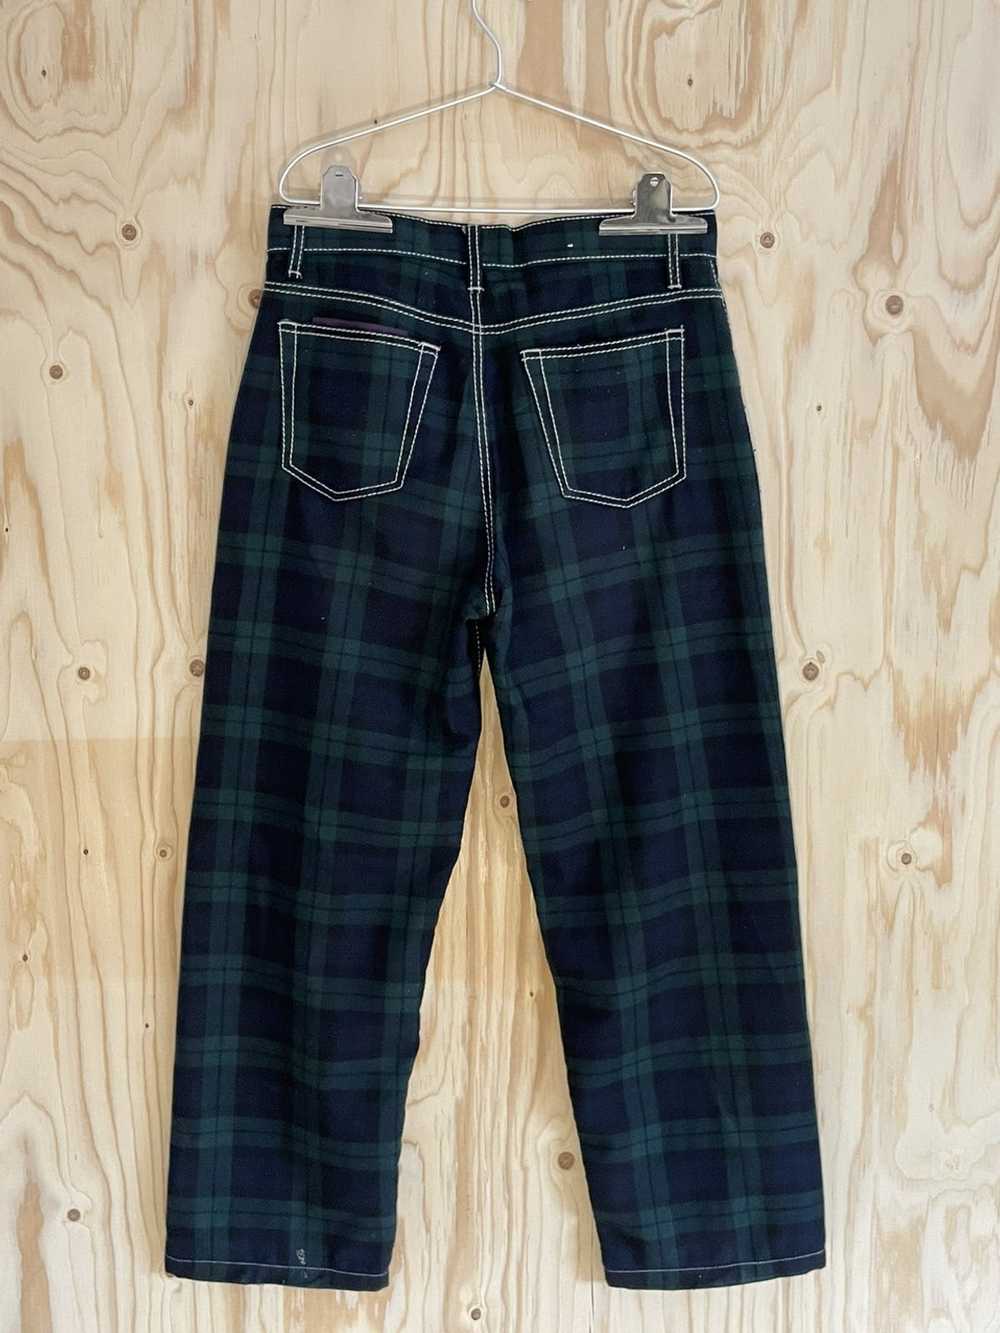 Eytys Eytys Benz Plaid wool flannel jeans - image 3